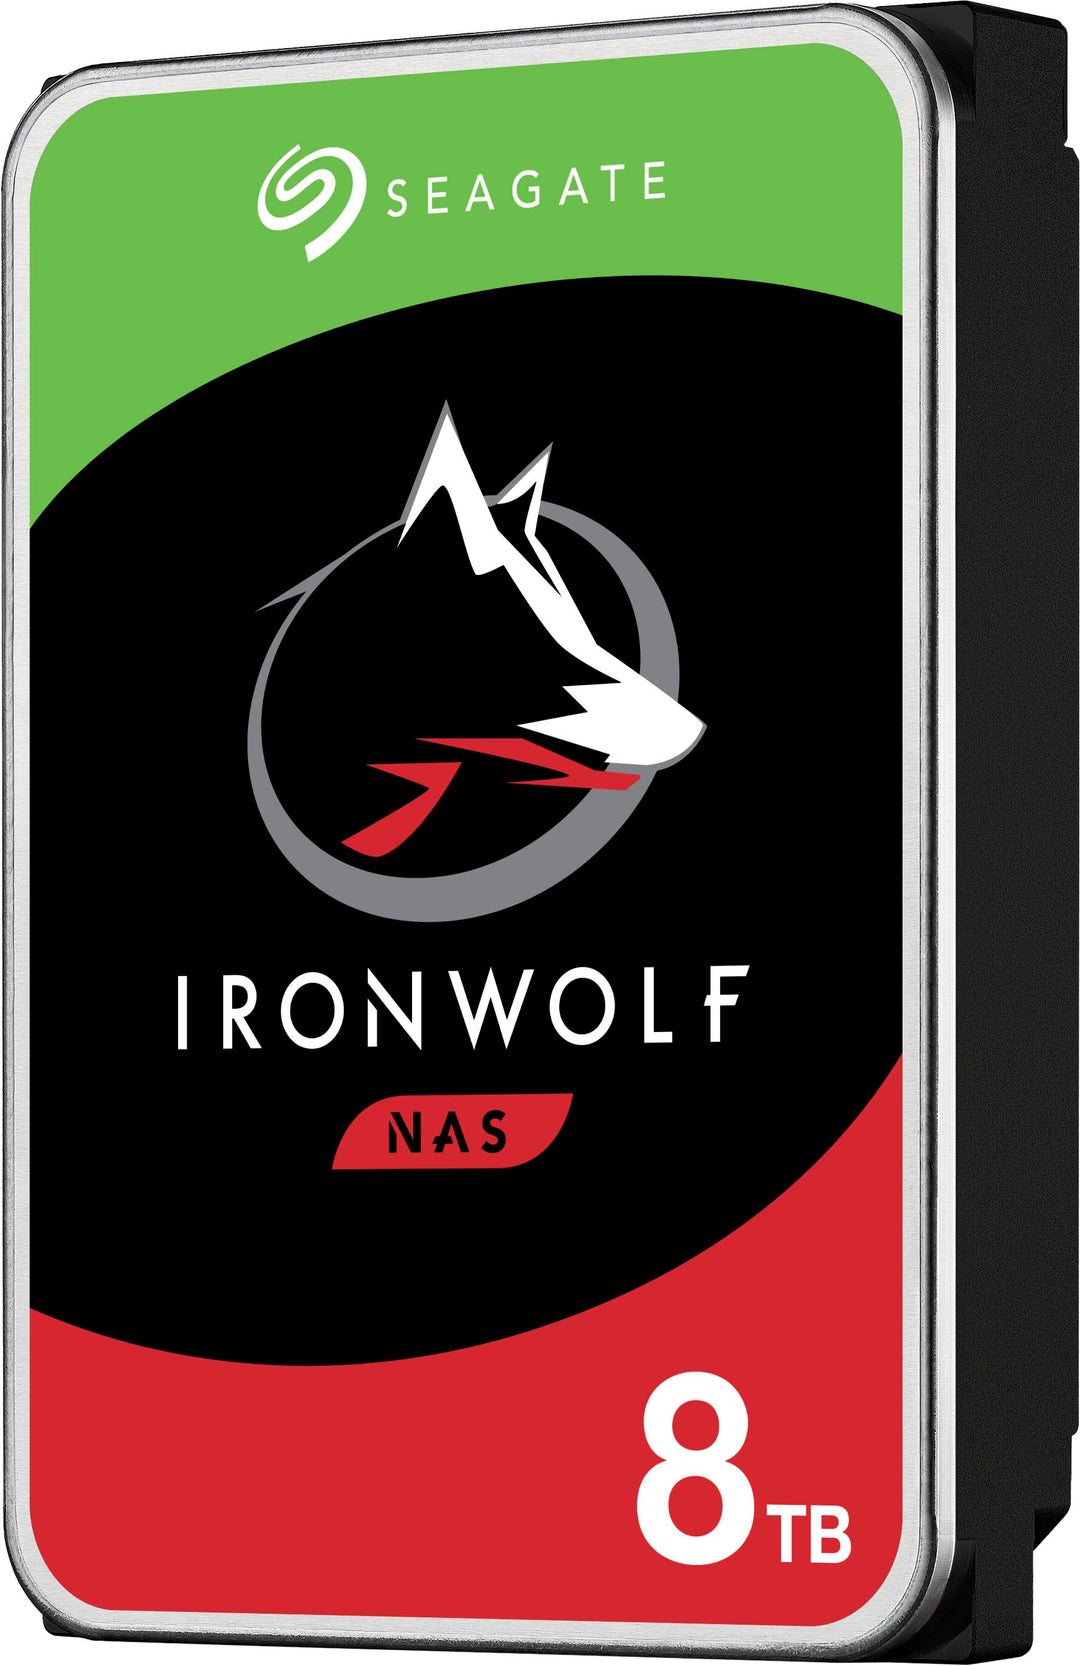 Seagate - IronWolf 8TB Internal SATA NAS Hard Drive with Rescue Data Recovery Services_2